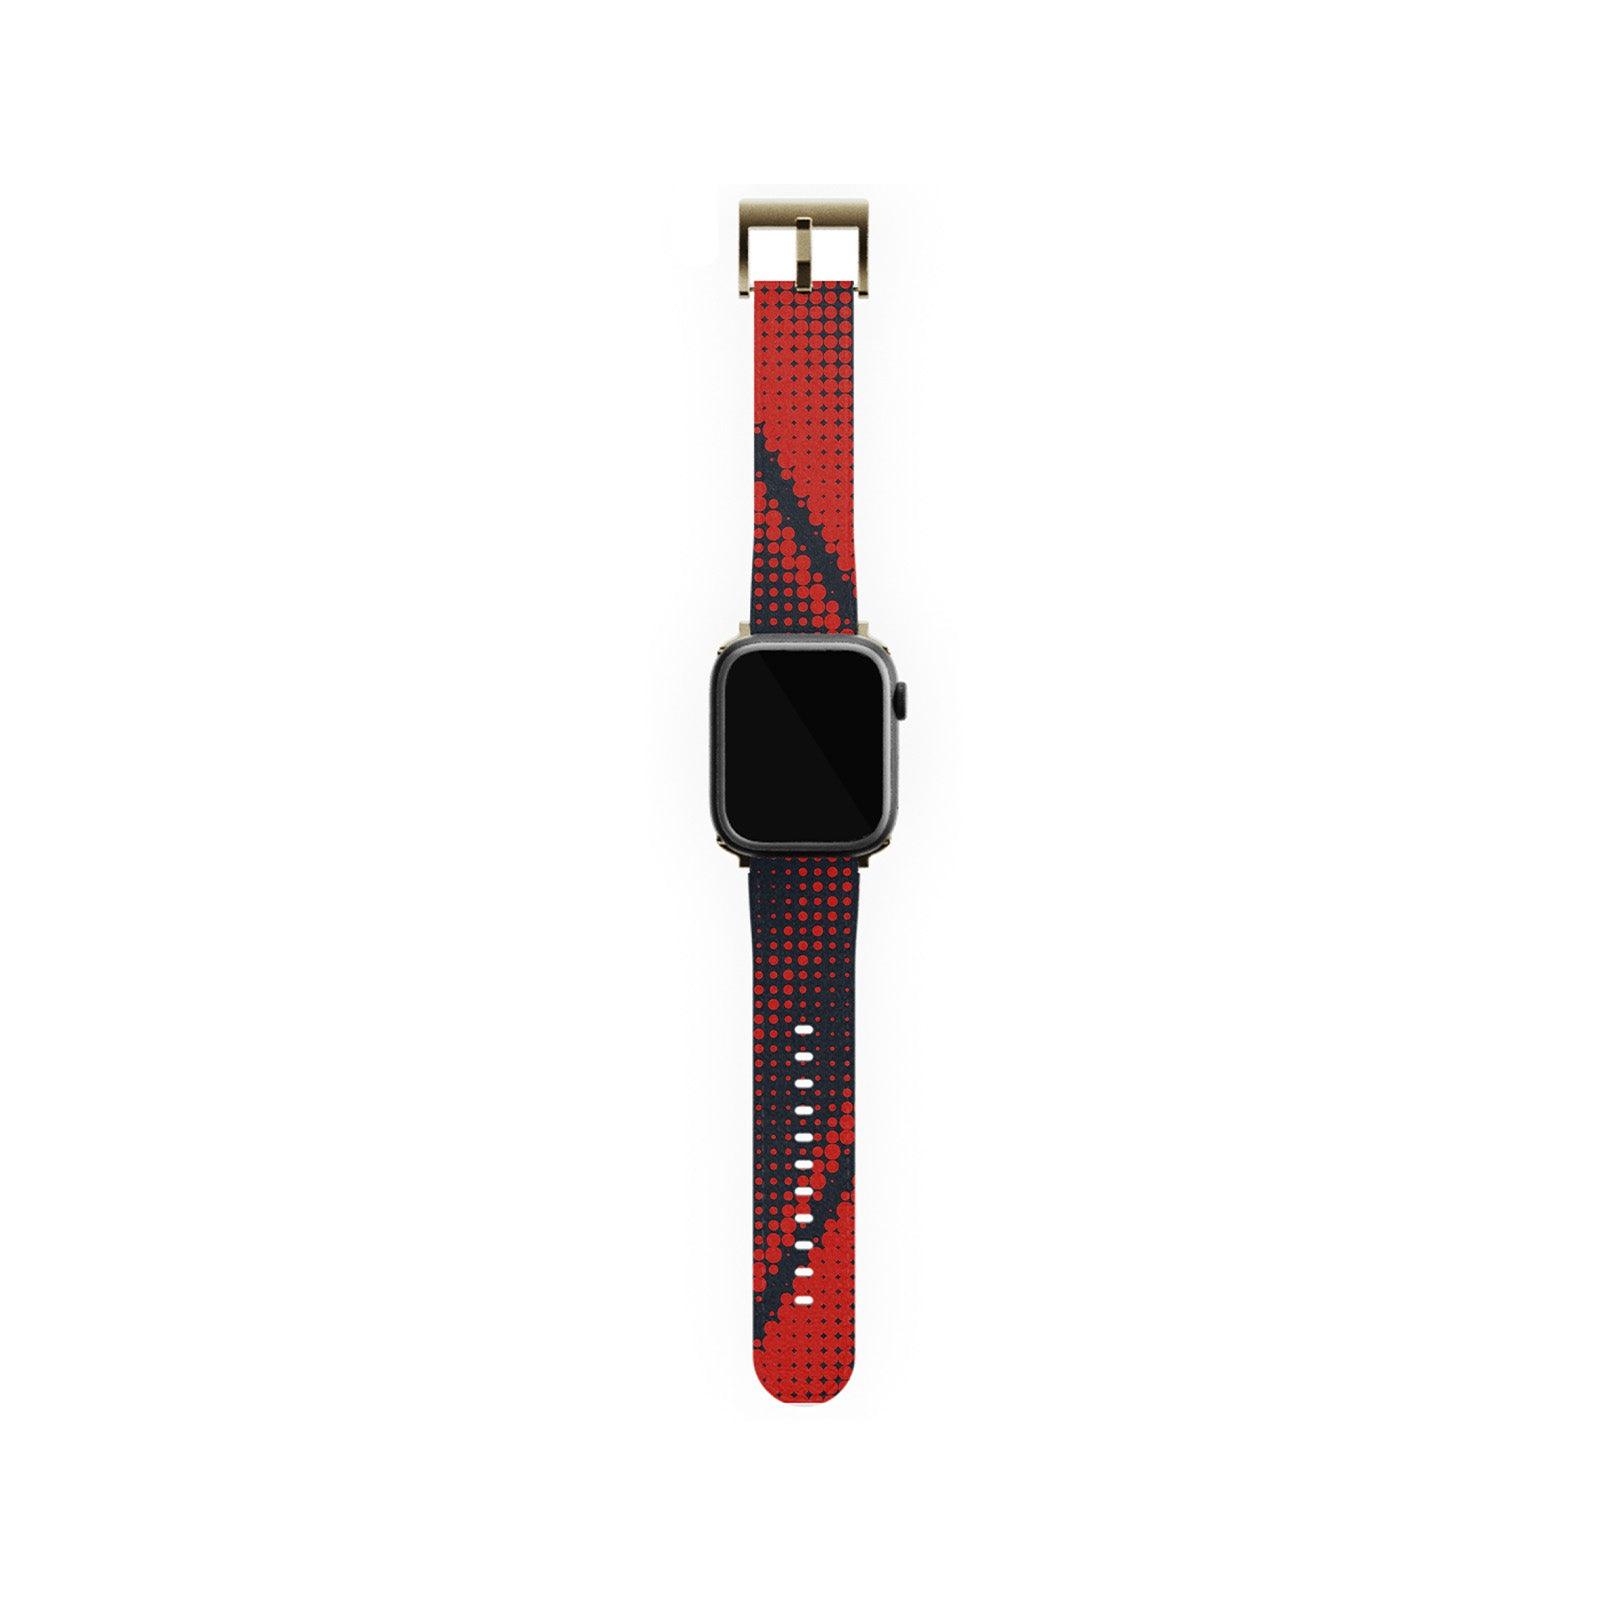 Custom Apple Watch Band Custom Apple Watch Band - undefined - Qstomize.com